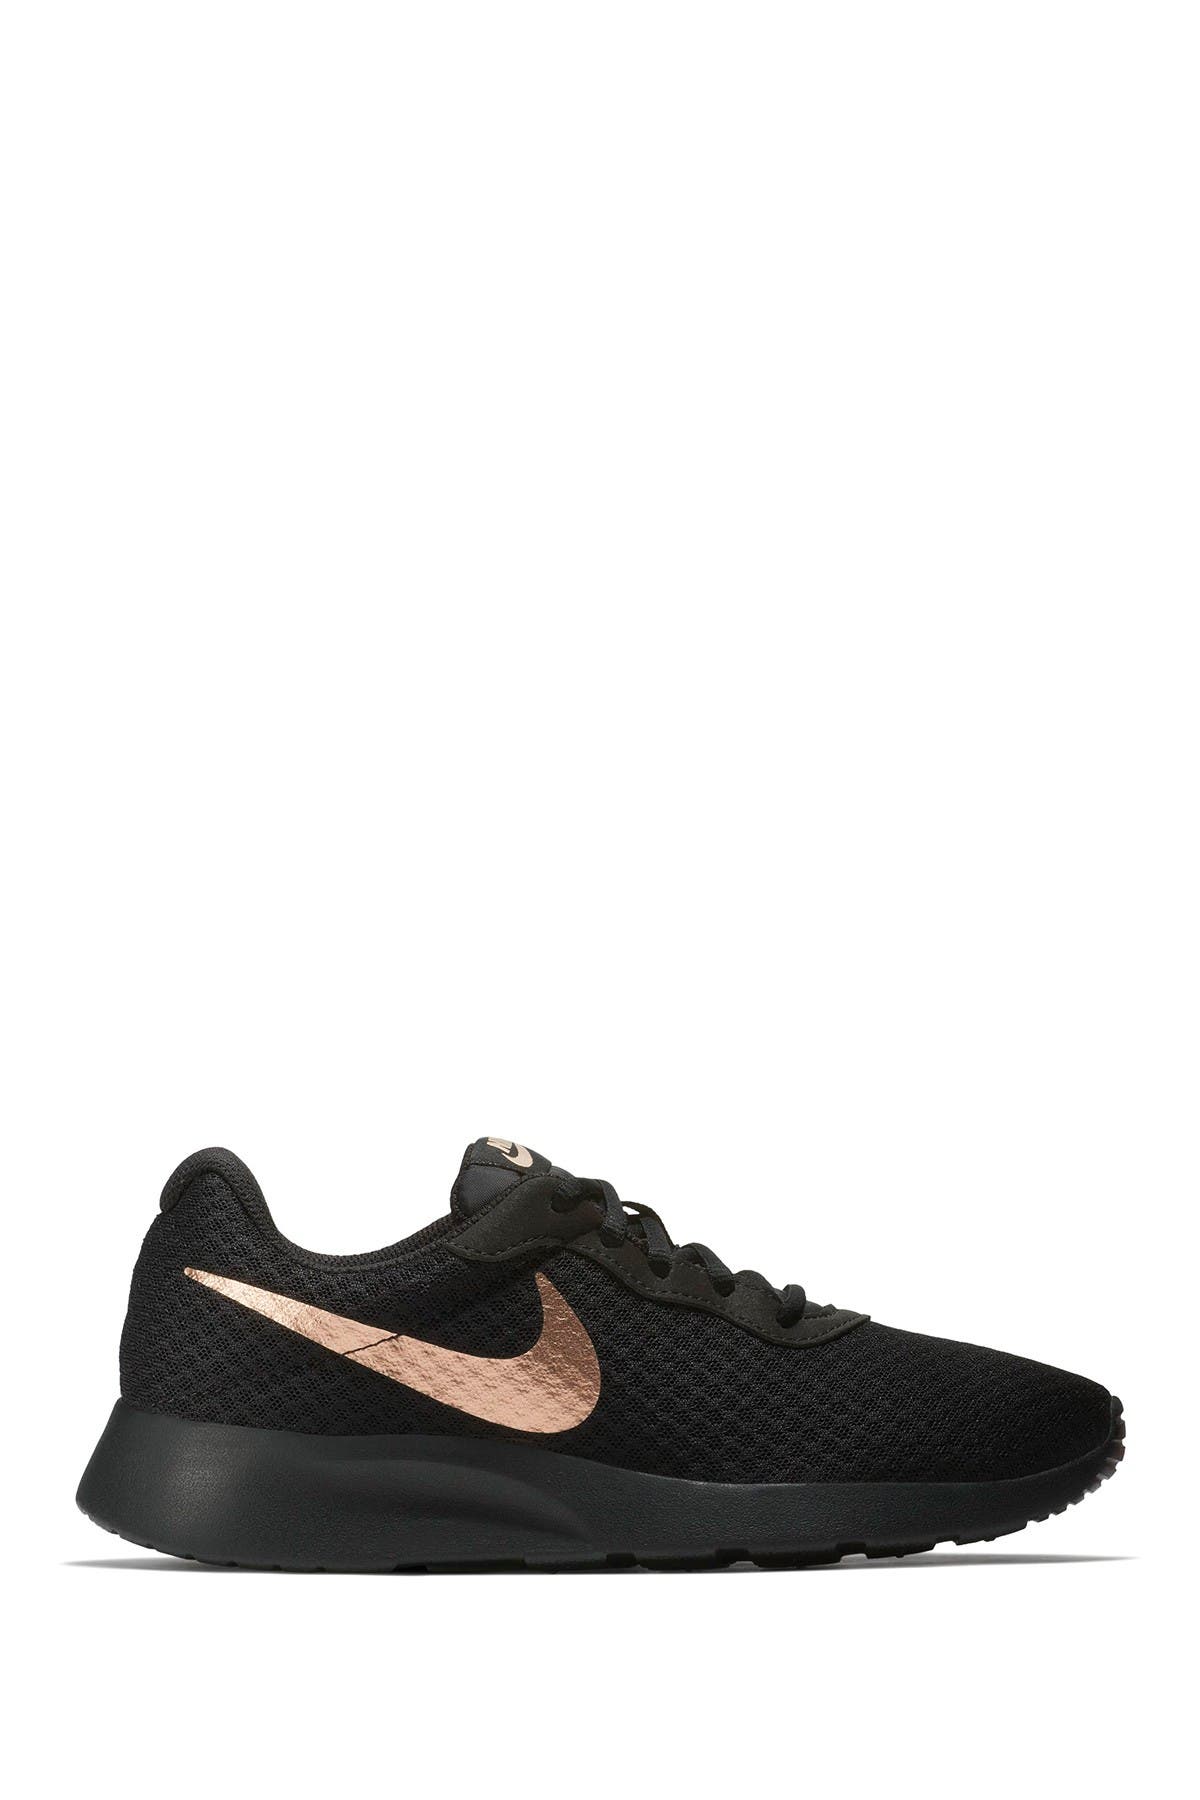 black nike shoes with rose gold swoosh